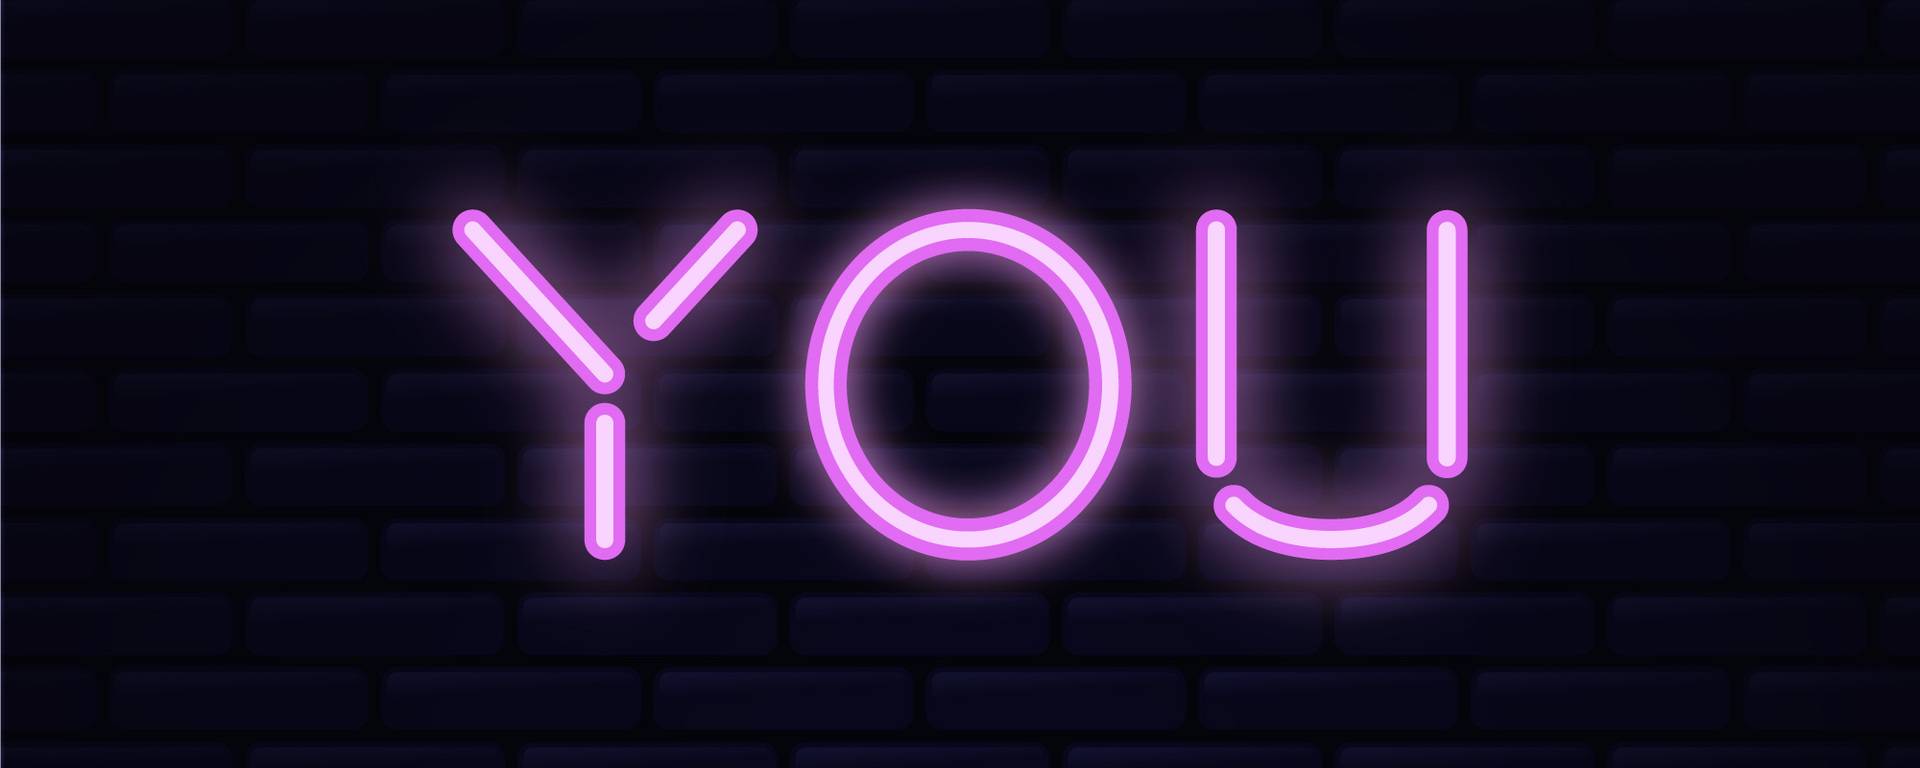 The word 'YOU' in neon lights